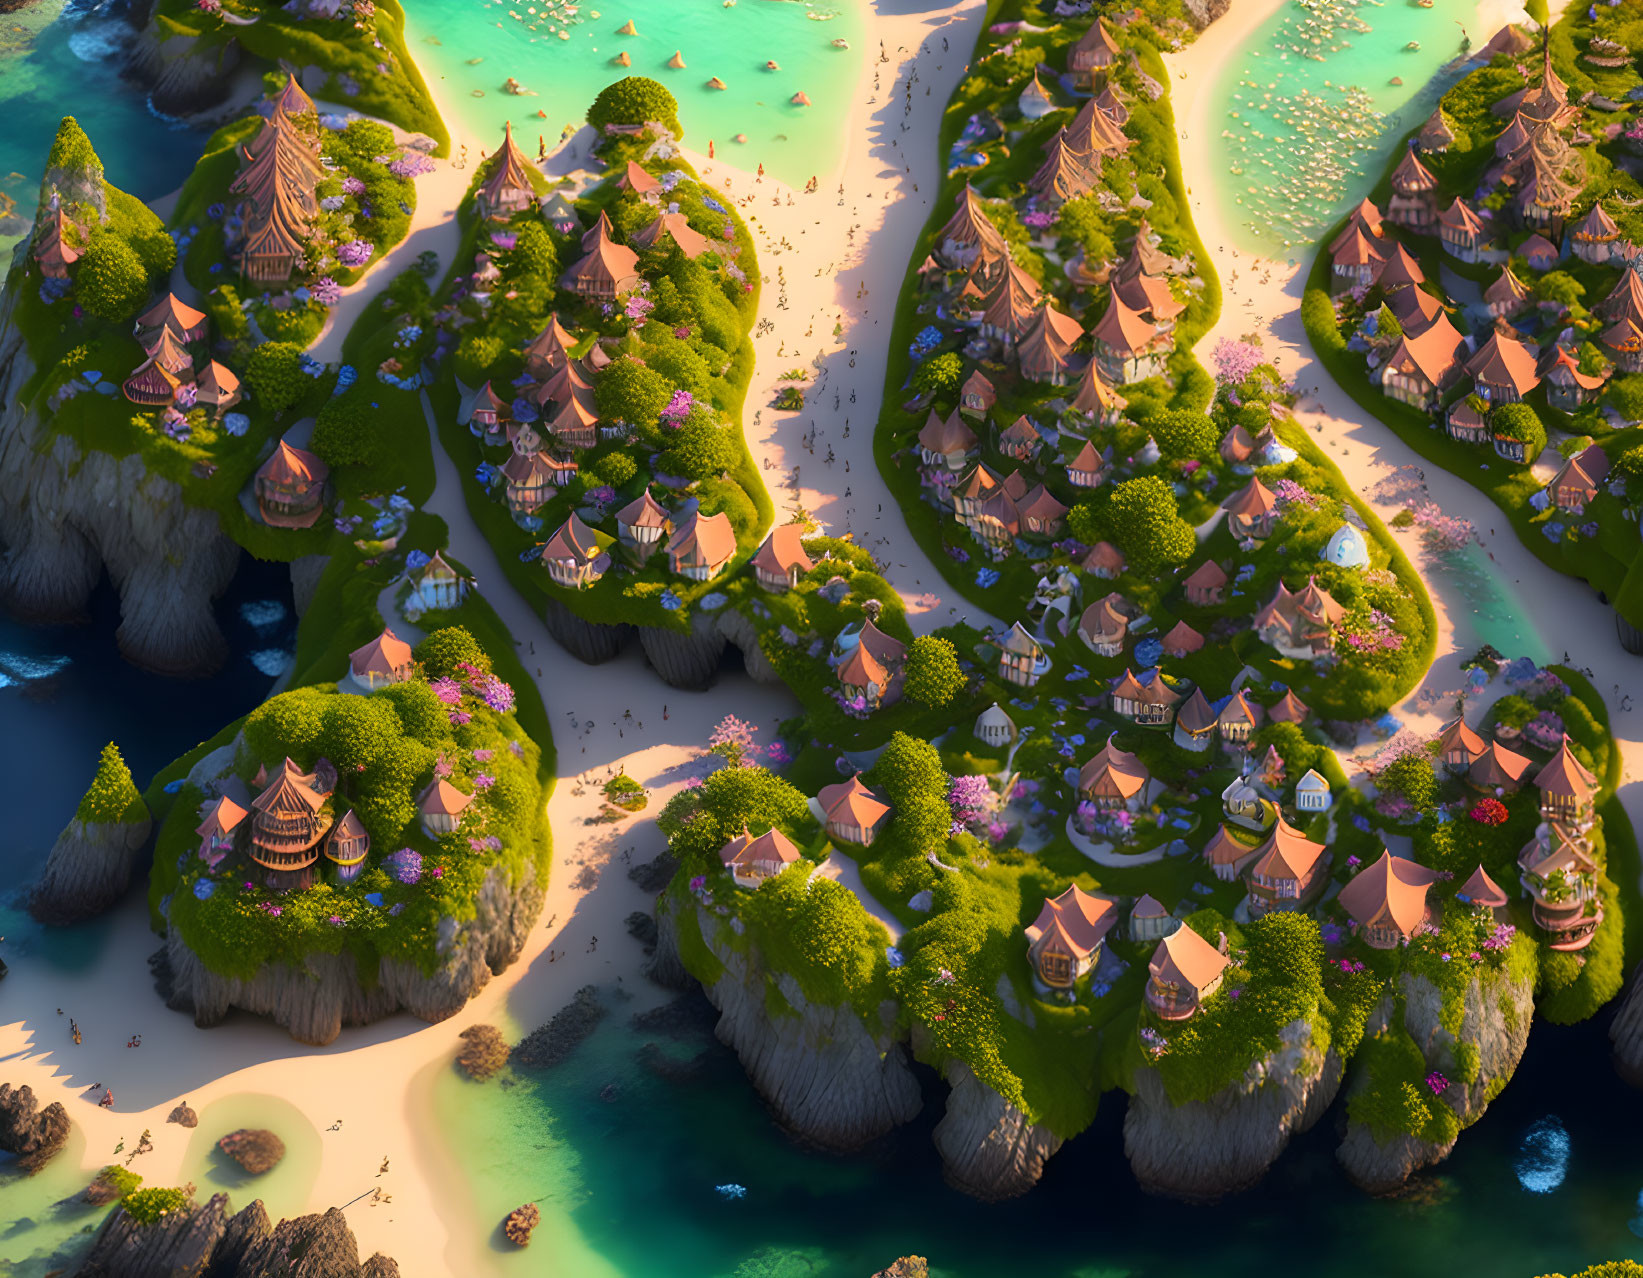 Fantastical coastal village with thatched-roof cottages on lush green islands at sunset